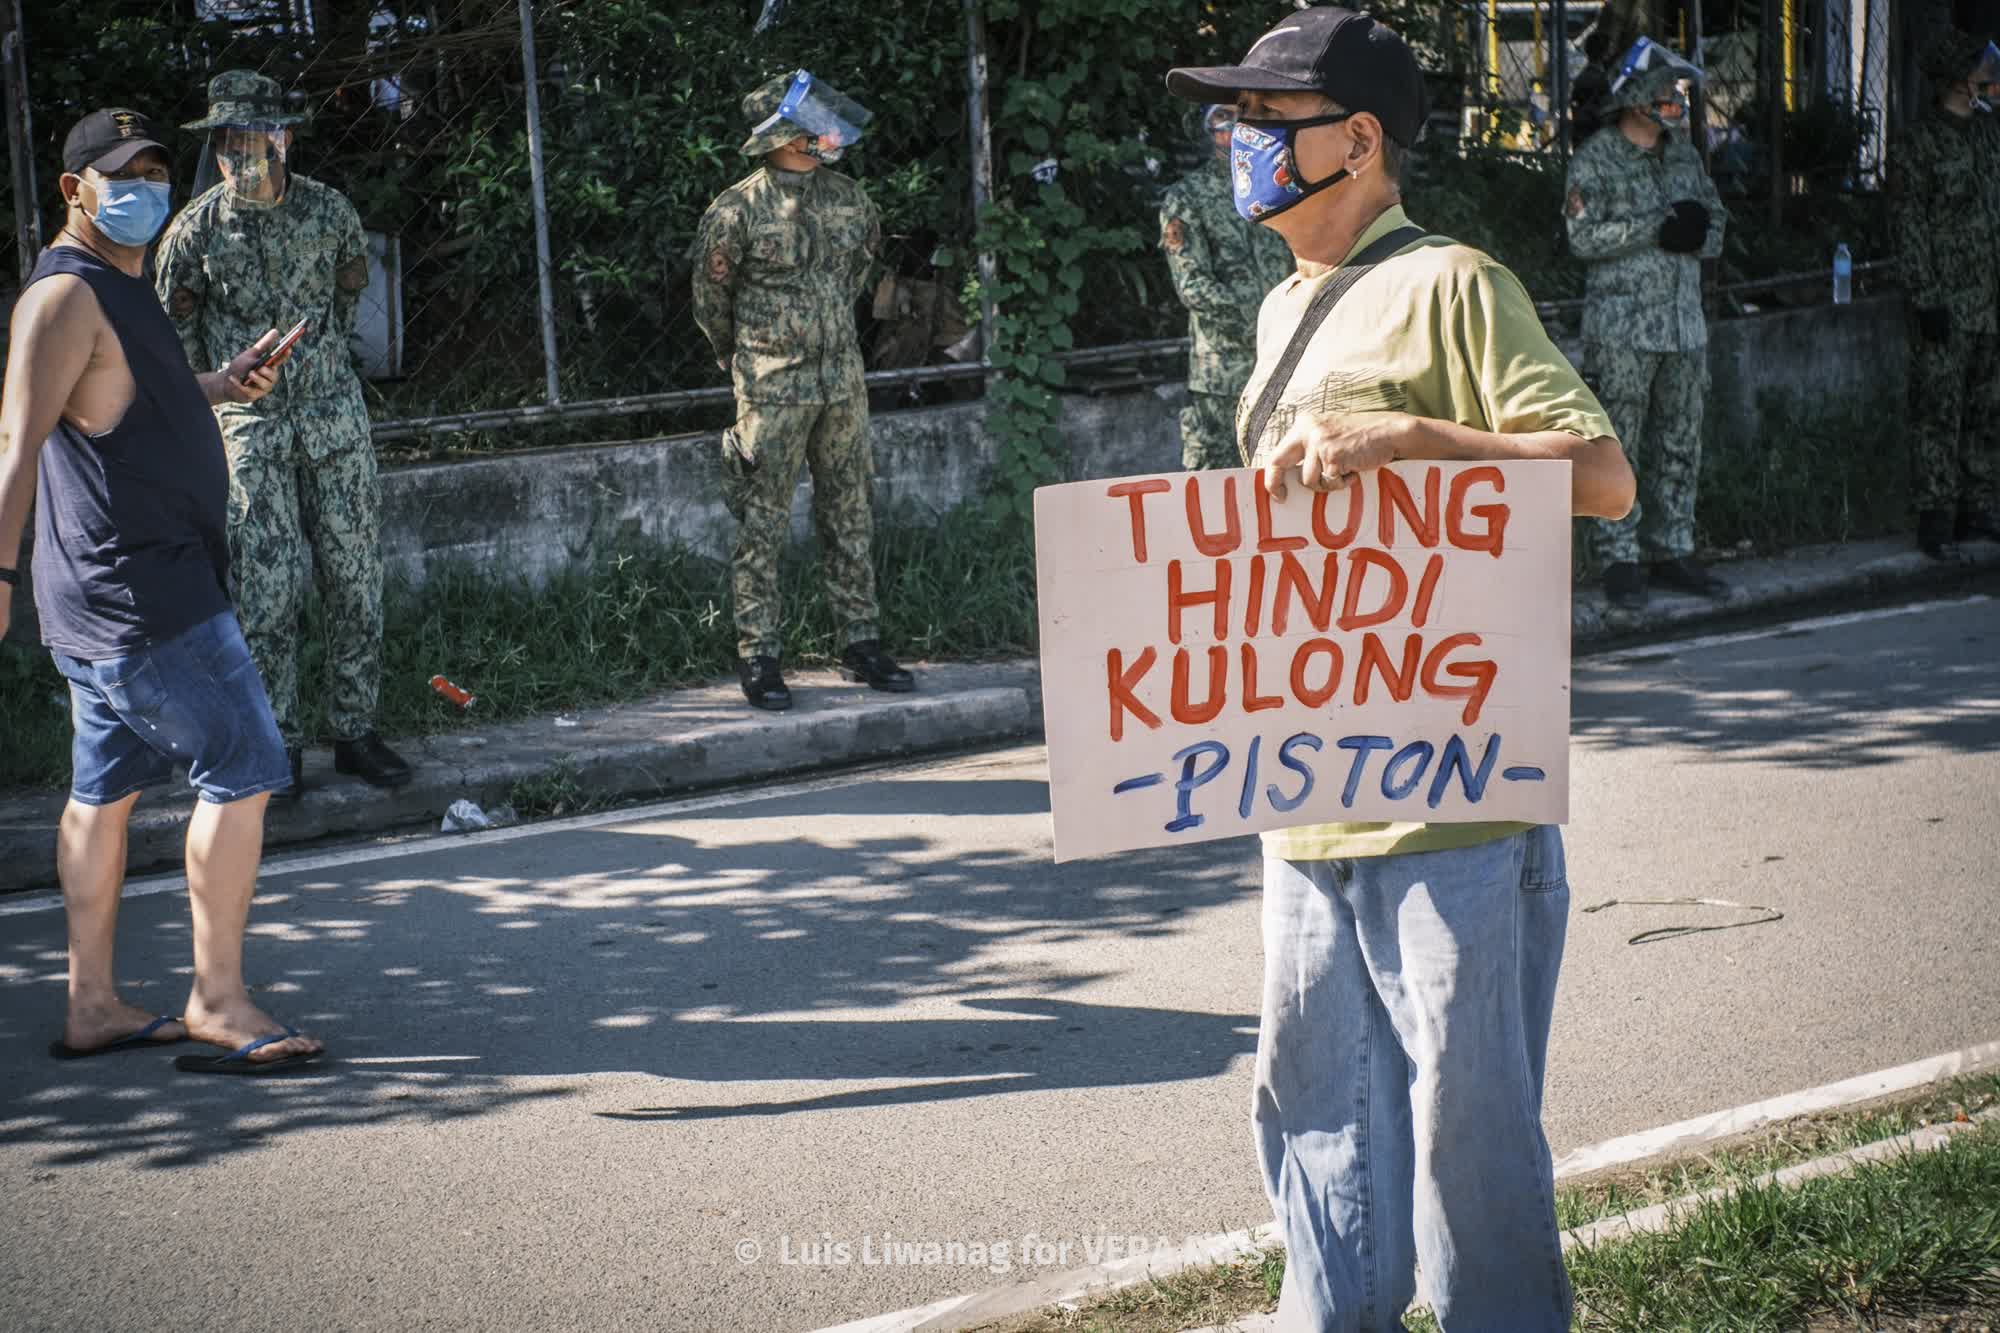 Despite ban, voices of dissent ring loud and clear SONA 2020 18/19  Photos by Luis Liwanag